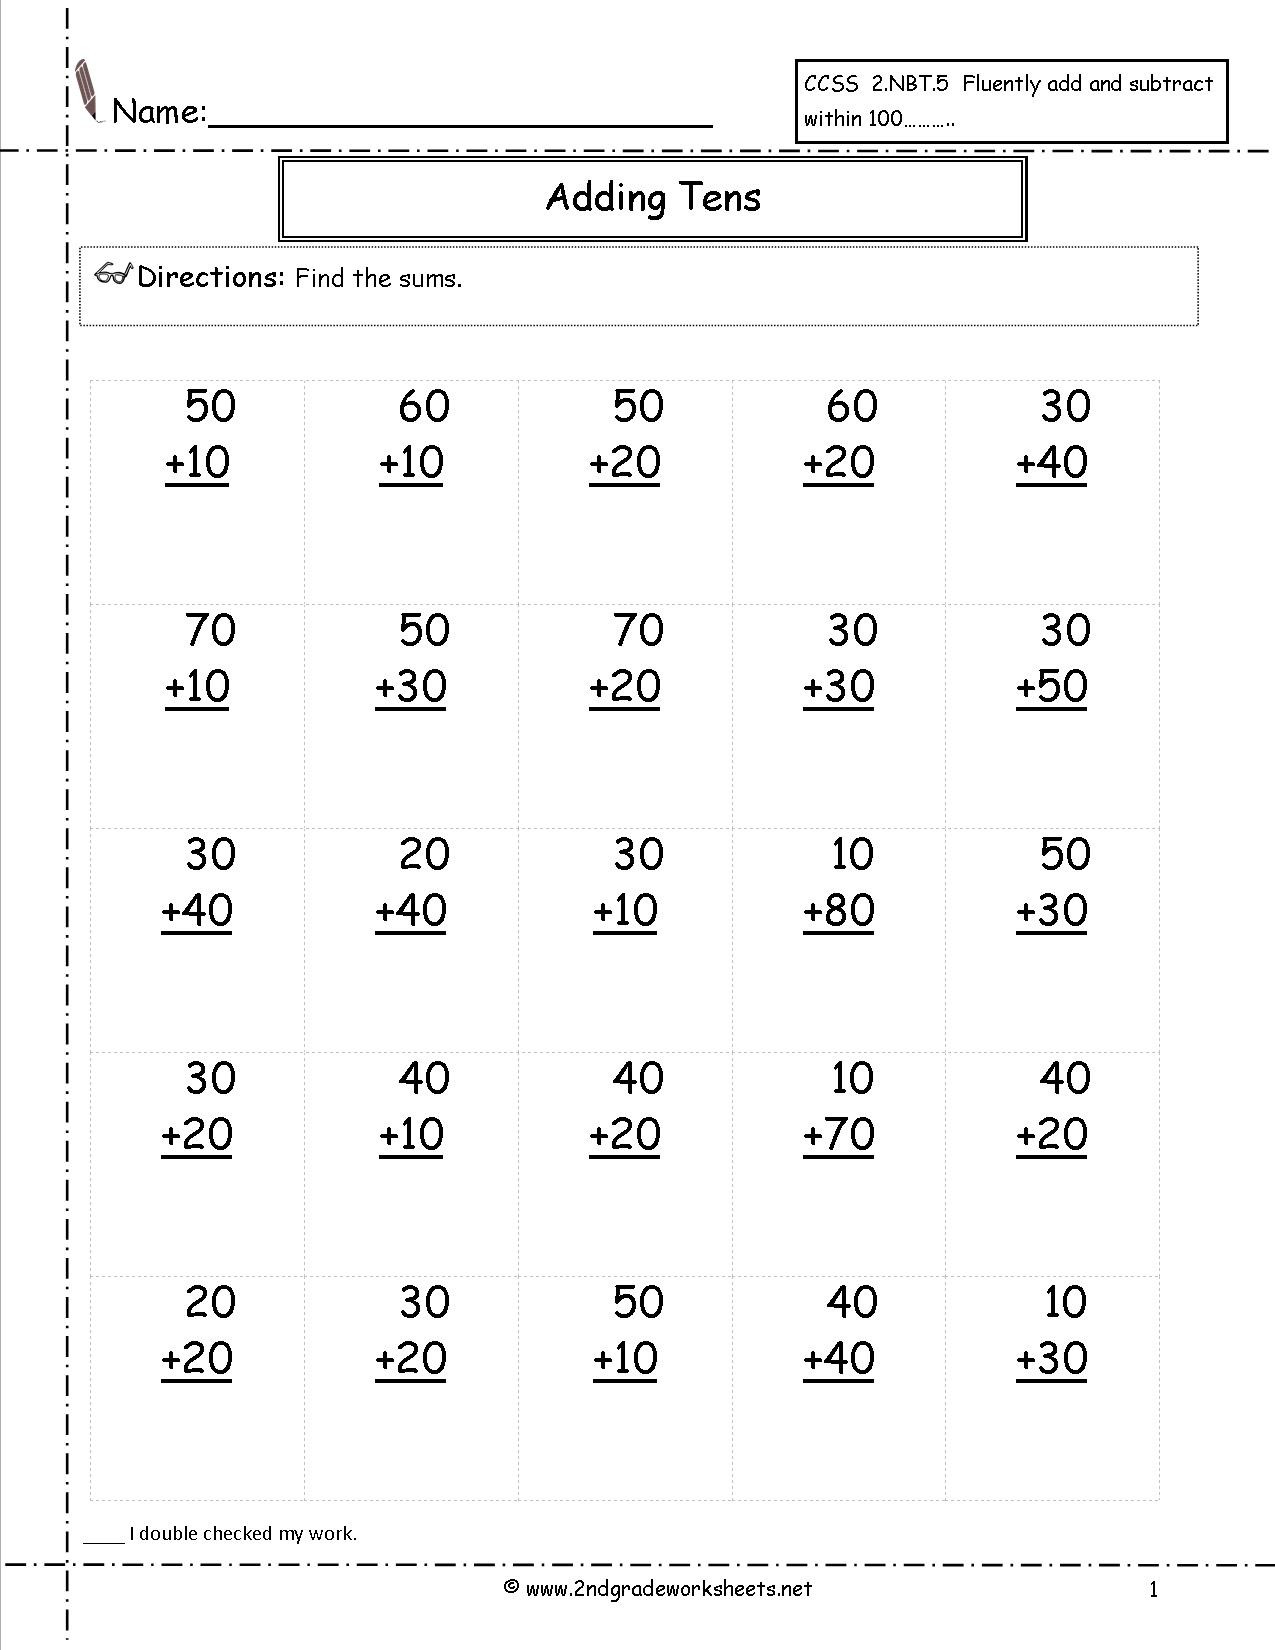 Free Math Worksheets Second Grade 2 Addition Add 3 Single Digit Numbers